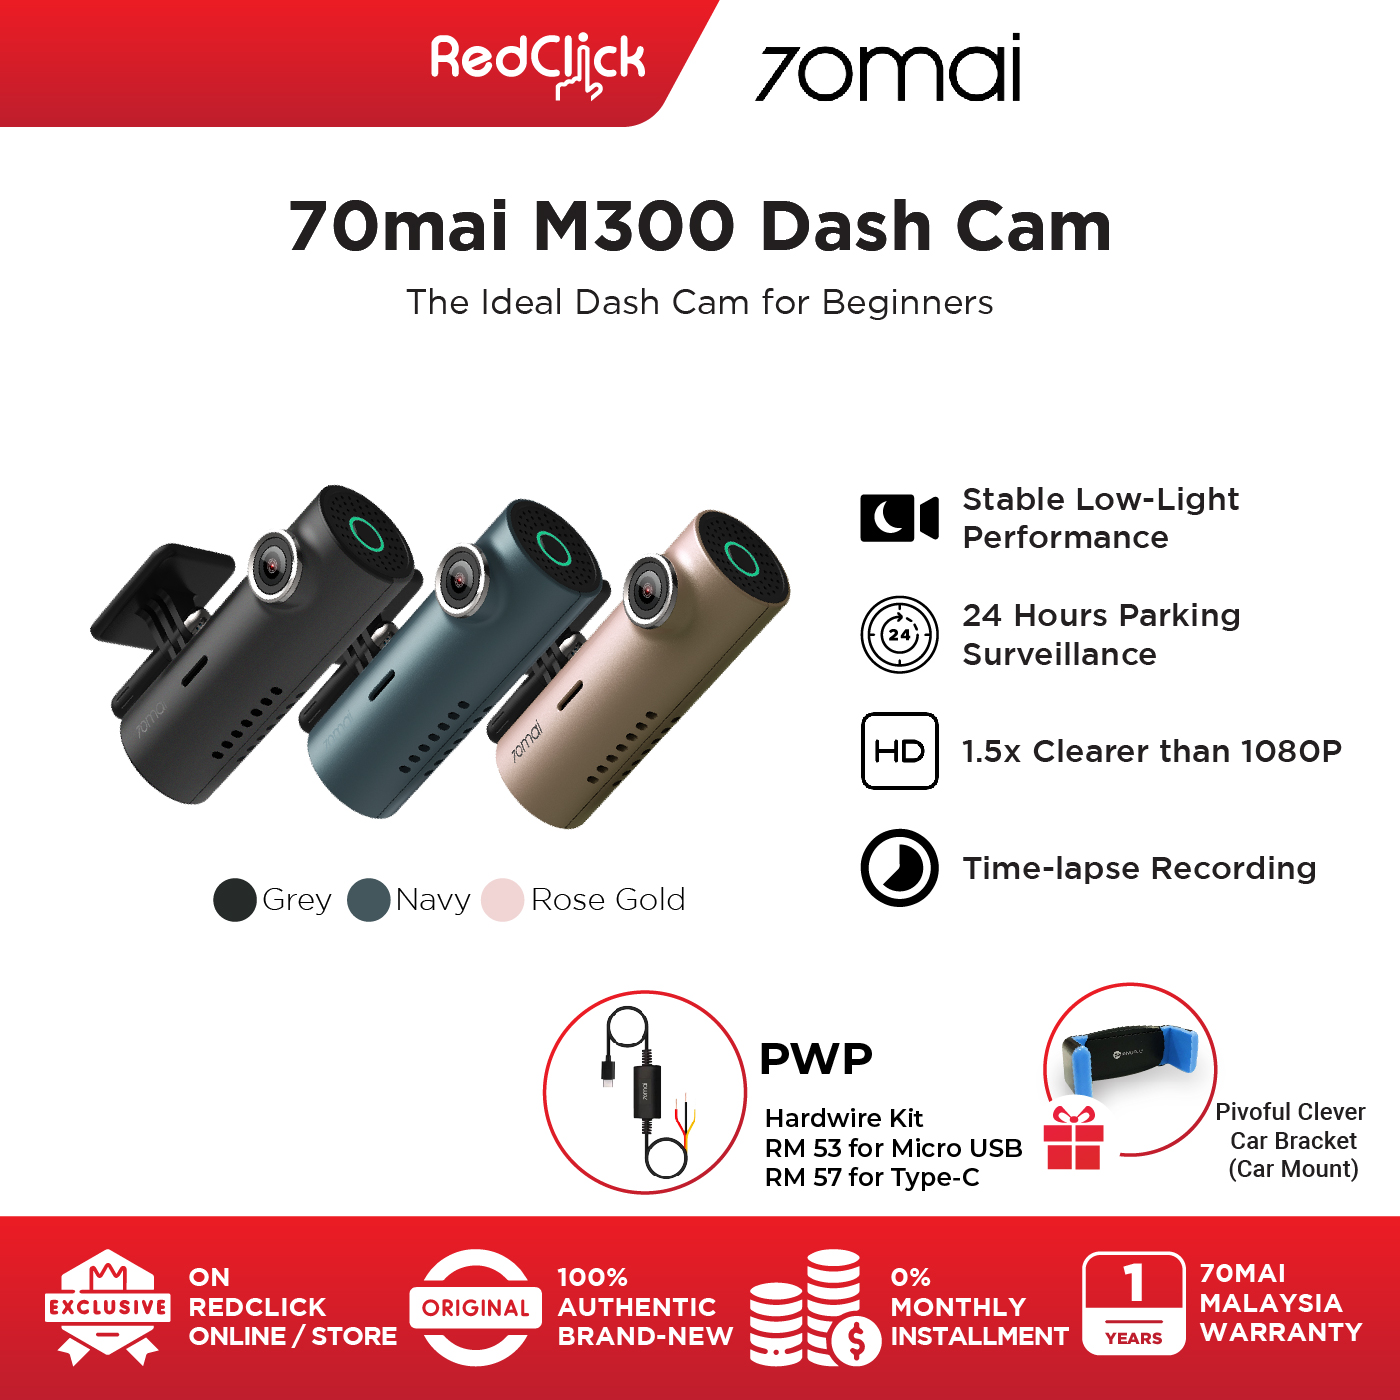 70mai Dashcam M300 1296P HD Resolution Wide Viewing Angle Built-In G Sensor 24 Hours Parking Surveillance Stable Low-Light Performance Support 70mai App Control + Free Gift